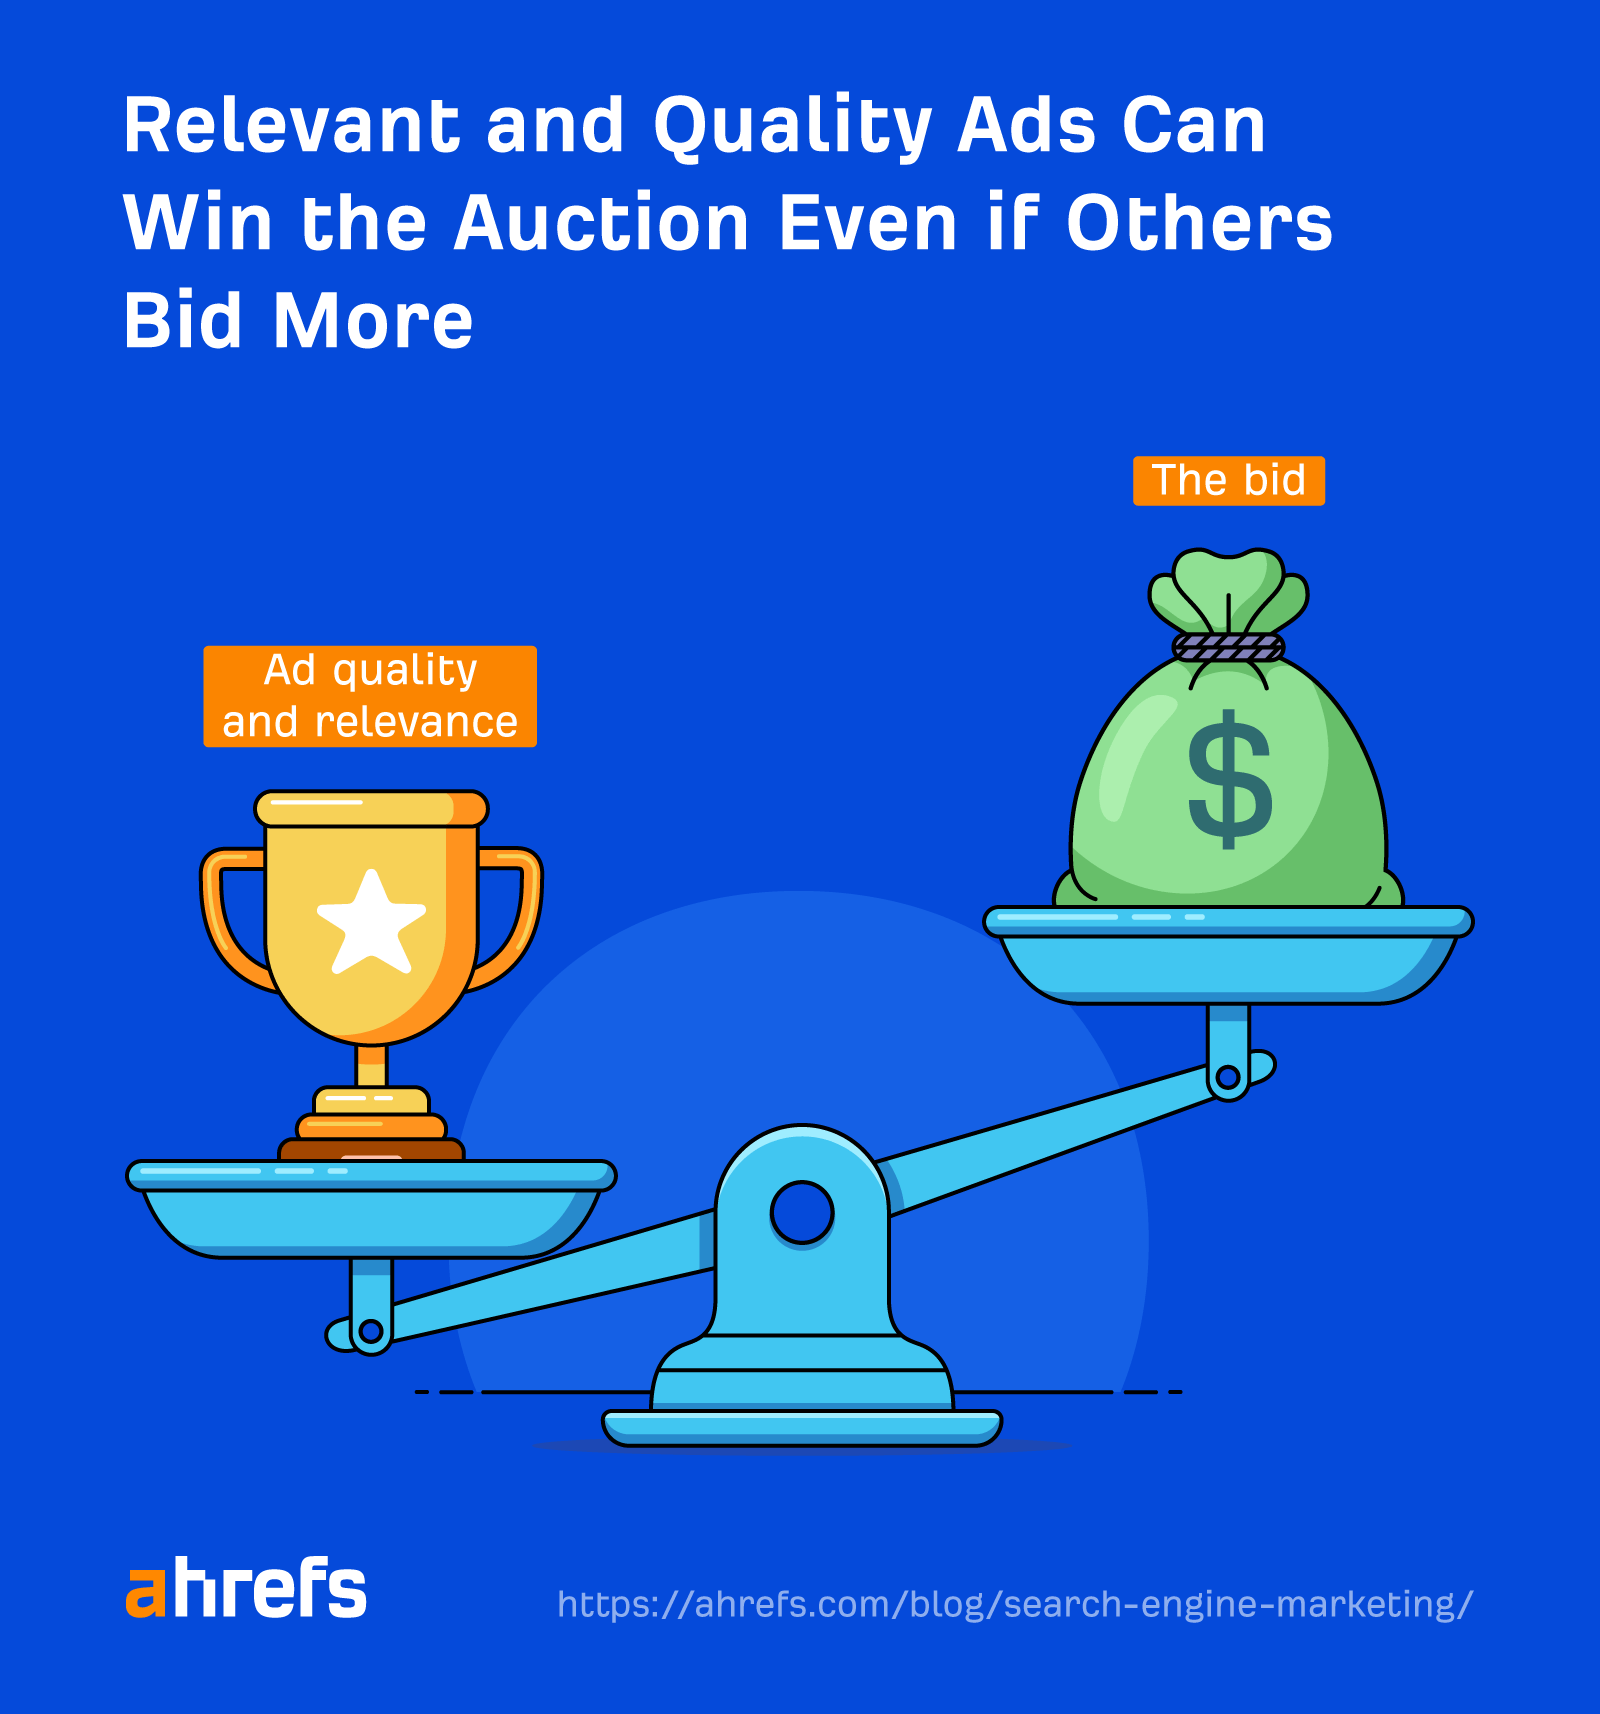 Relevant and quality ads can win the auction even if others bid more